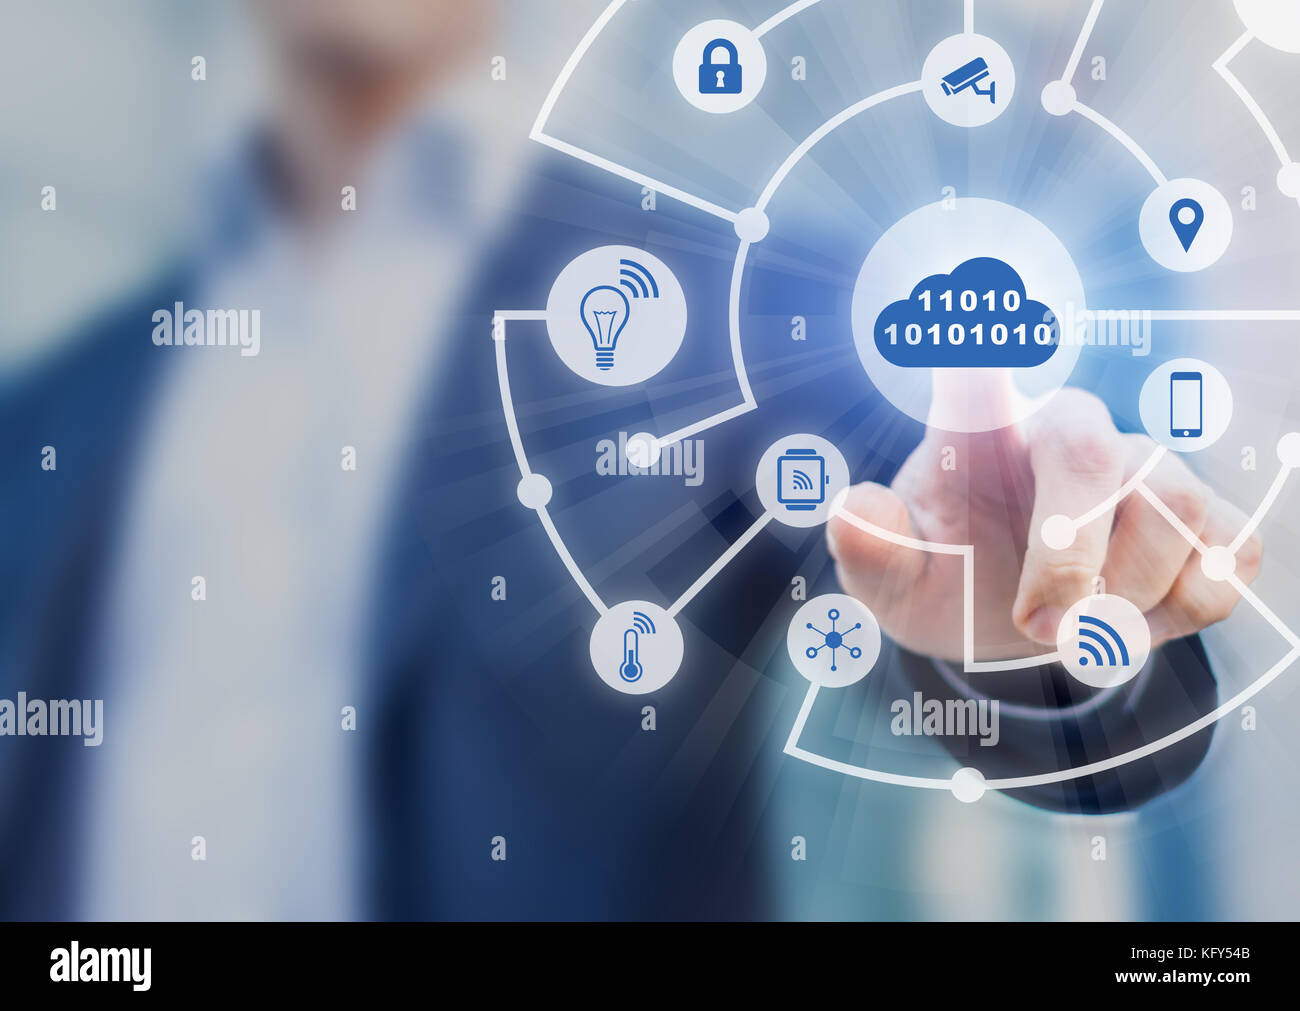 Internet of Things (IoT) technology concept with digital network of connected icons (smart home, cloud, wireless connection) on virtual interface, bus Stock Photo